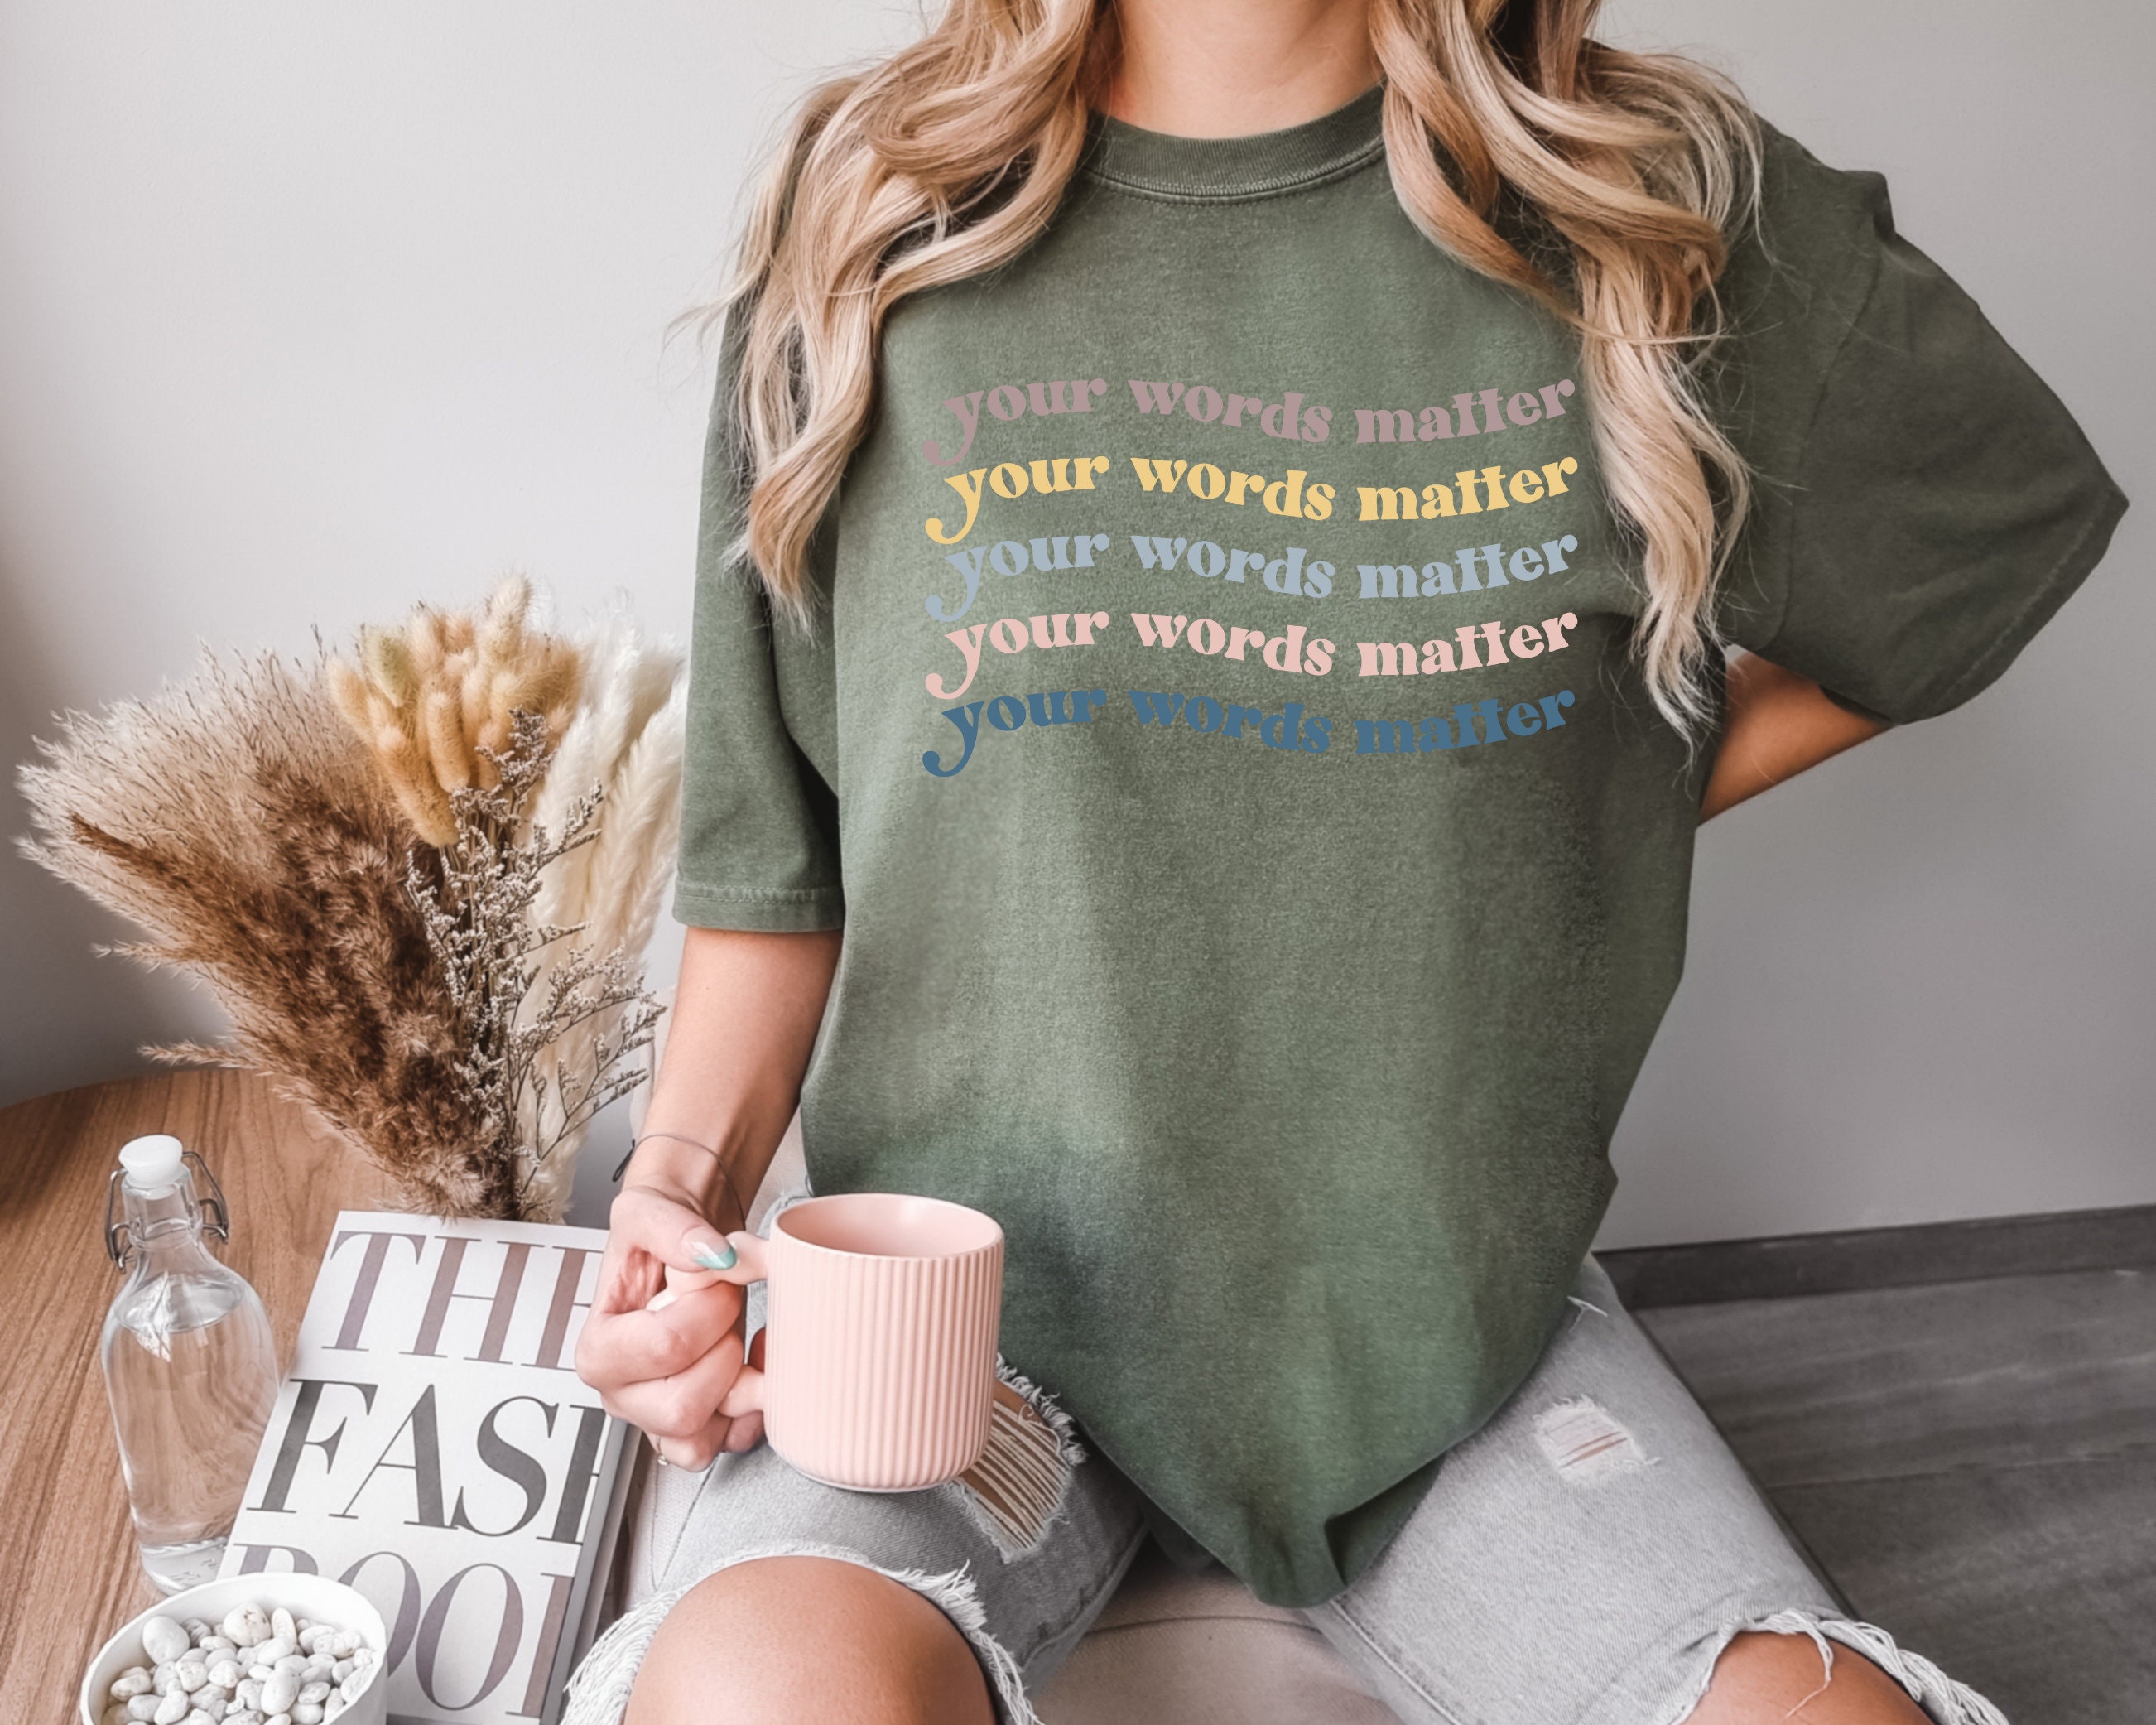 Discover  Speech Therapy Shirt, Your Words Matter, Speech Therapy Apparel, Speech Pathologist Shirt, Therapy Shirt, Language Therapy